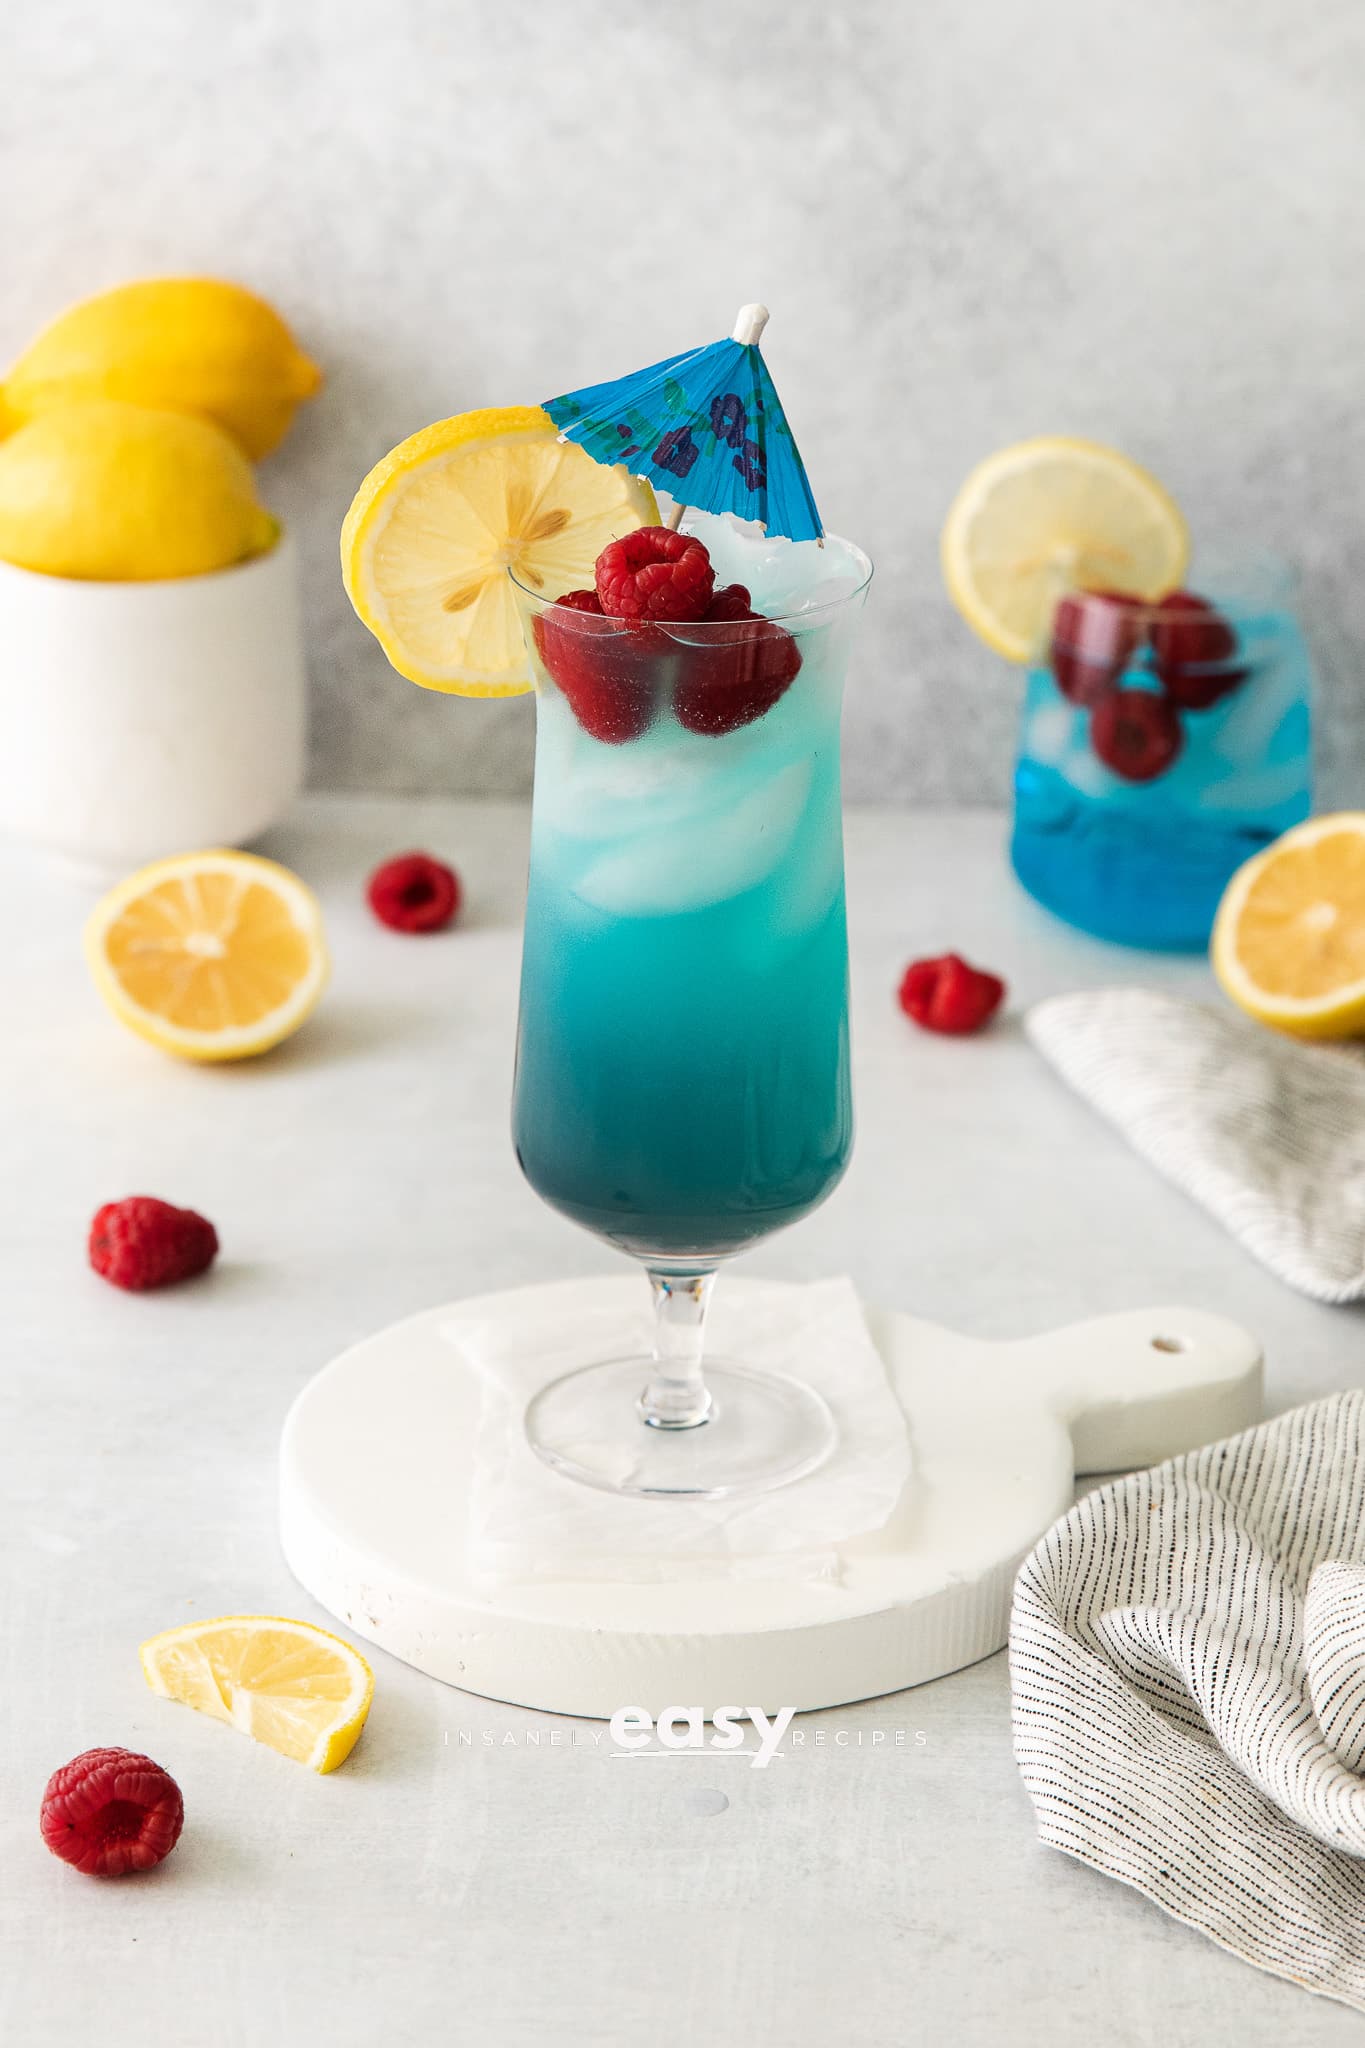 tall clear glass with red liquid at bottom, then blue liquid, with rapsberries and blue umbrella in drink. Surrounded by lemons and raspberries on the table